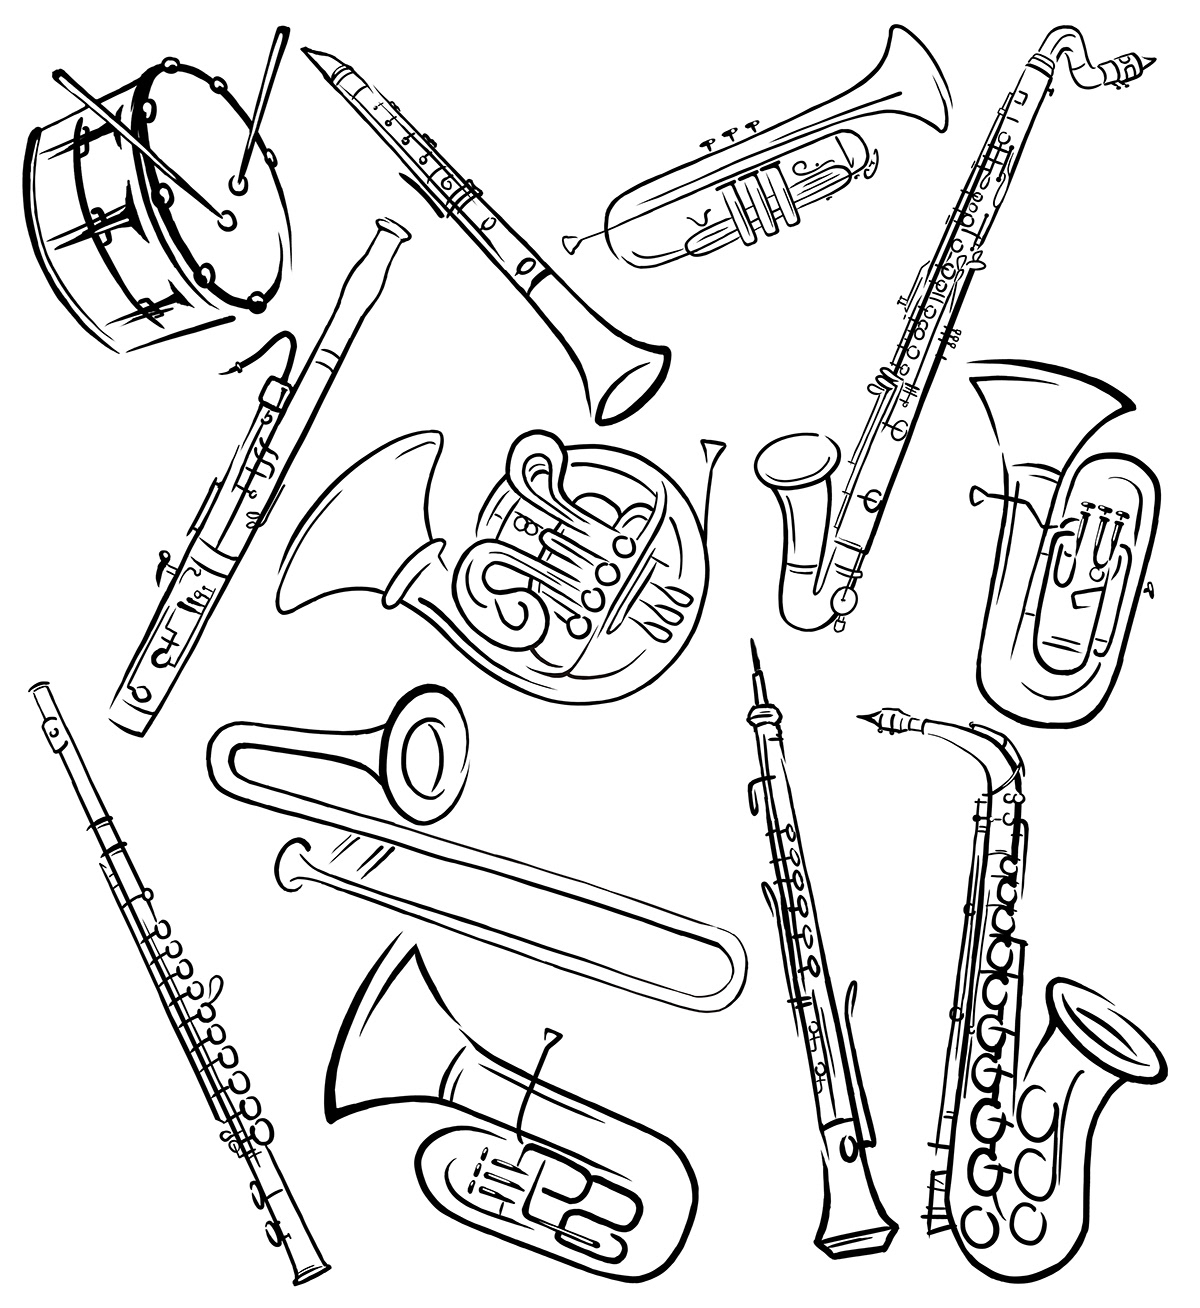 Musical instruments with t